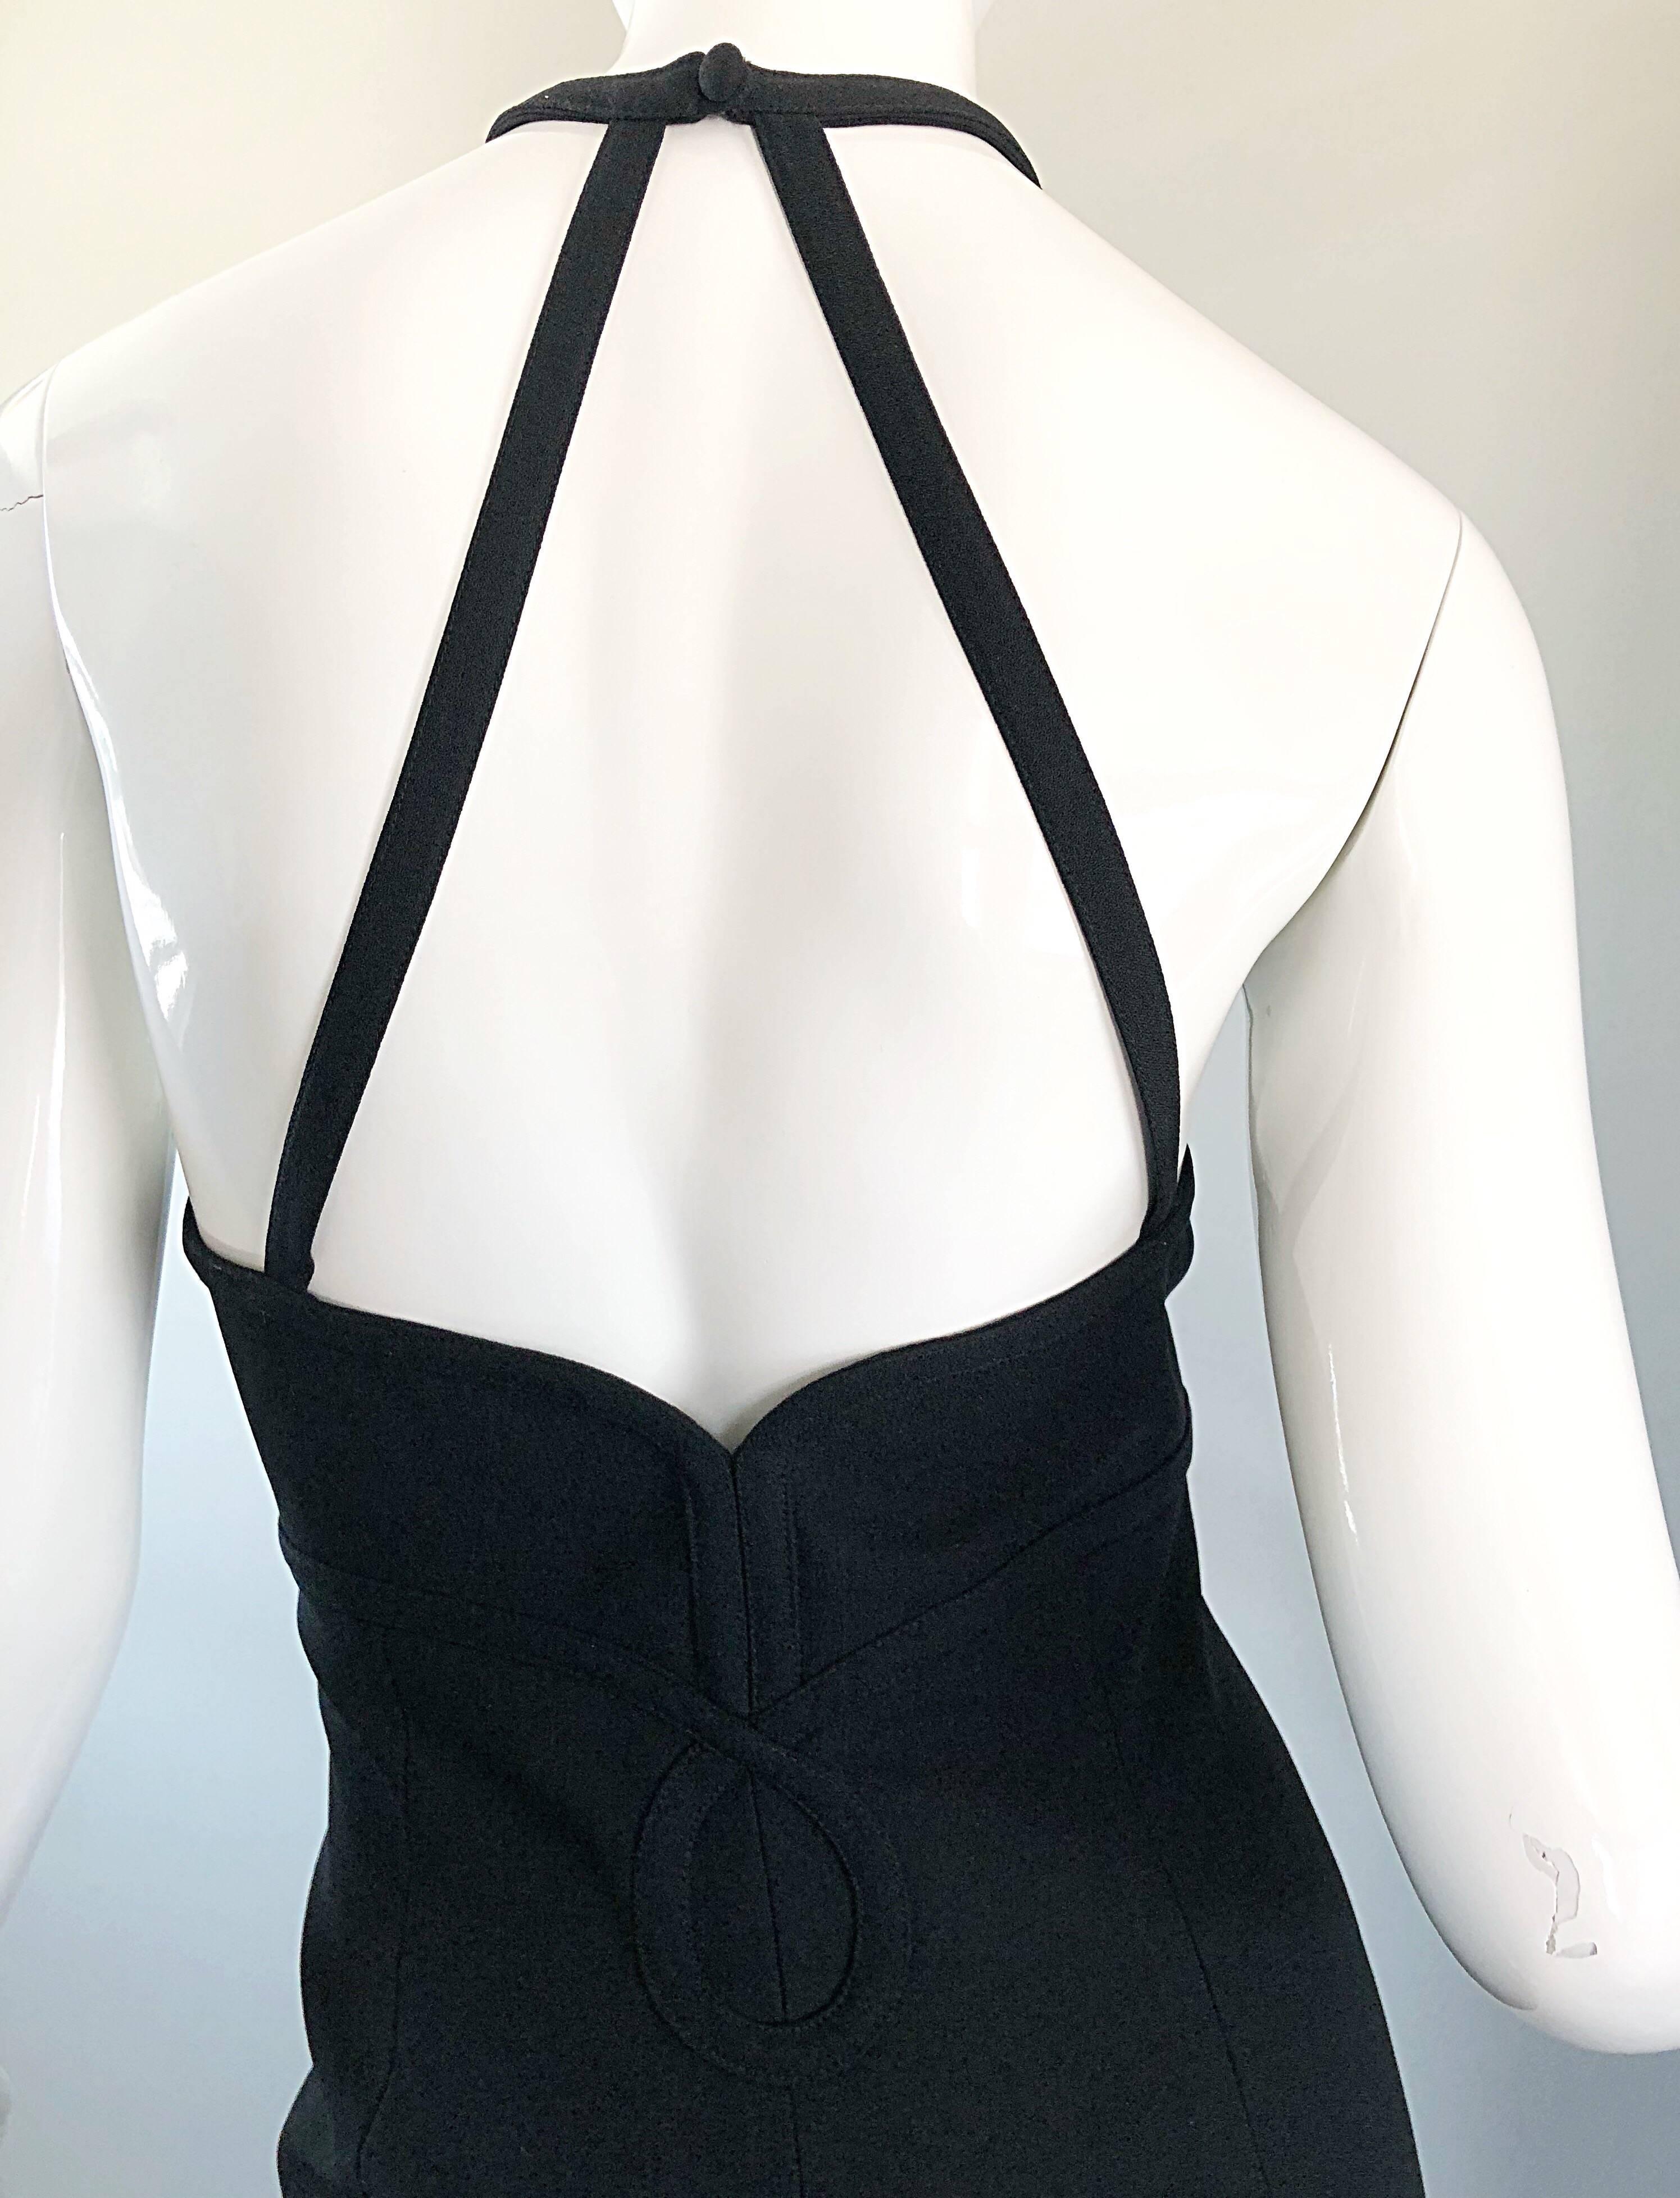 1990s Bill Blass Size 12 Black Crepe Keyhole Racerback Vintage 90s Dress In Excellent Condition For Sale In San Diego, CA